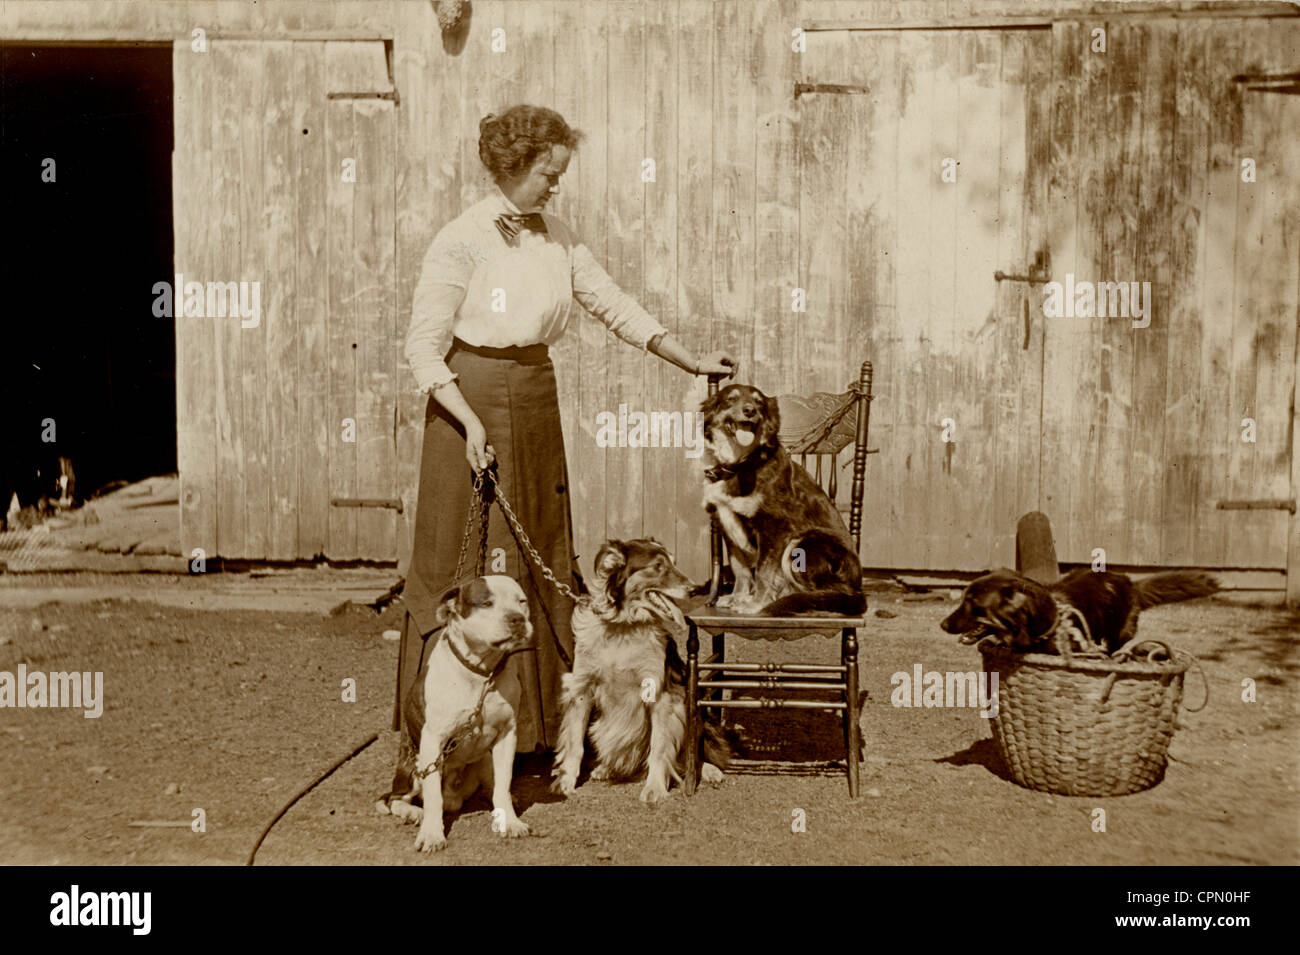 Middle Aged Rural Woman Managing Four Dogs at Barn Stock Photo